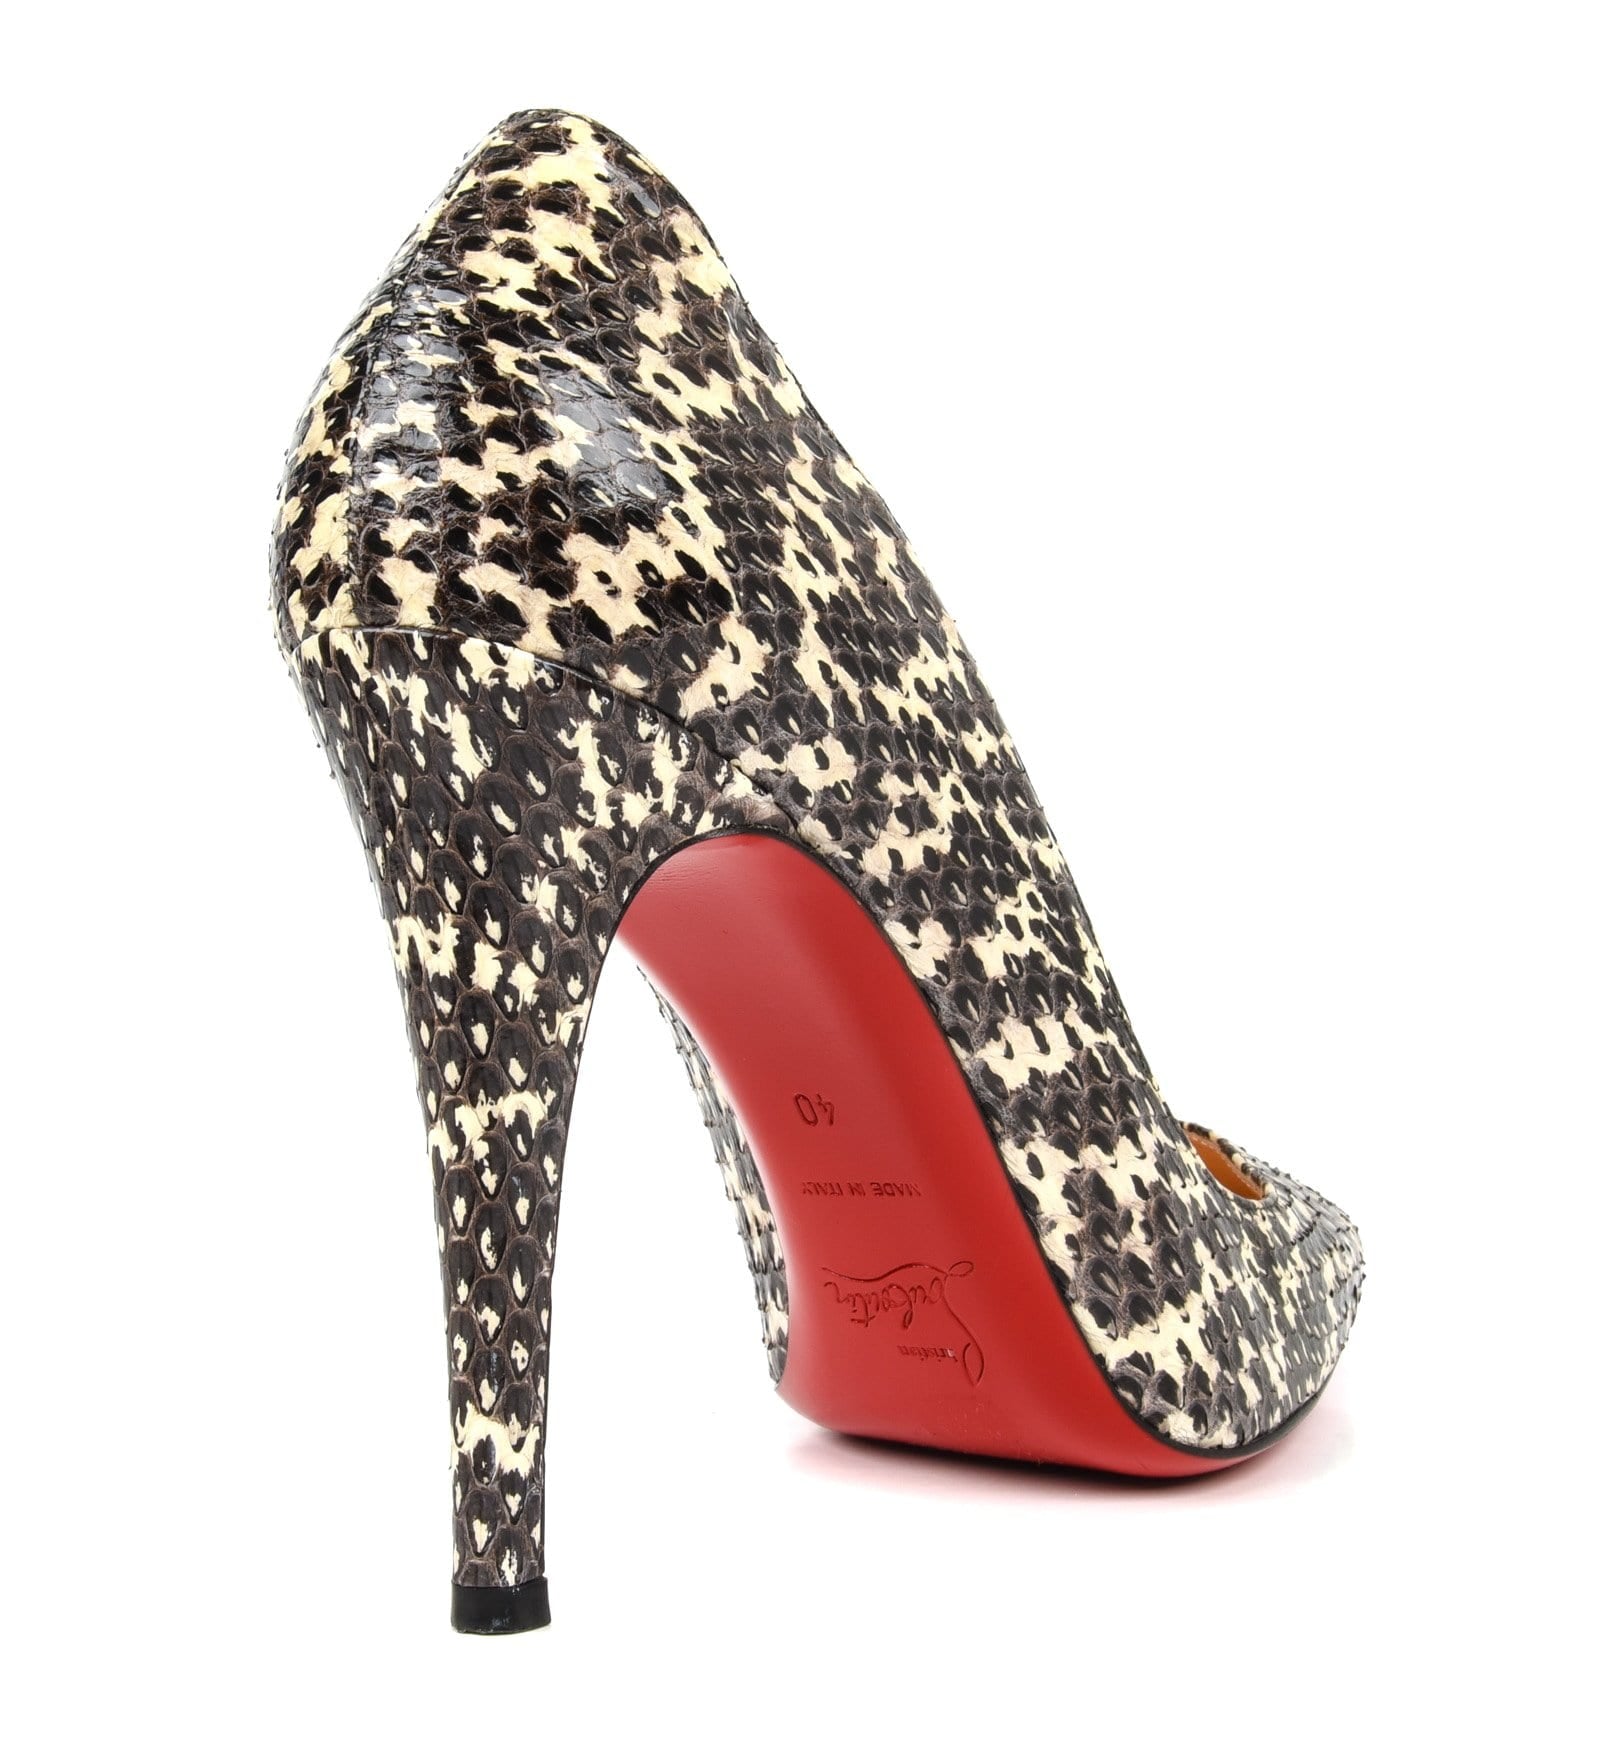 Christian Louboutin Shoe Black and Off White Snakeskin Pump 40 / 10 - mightychic